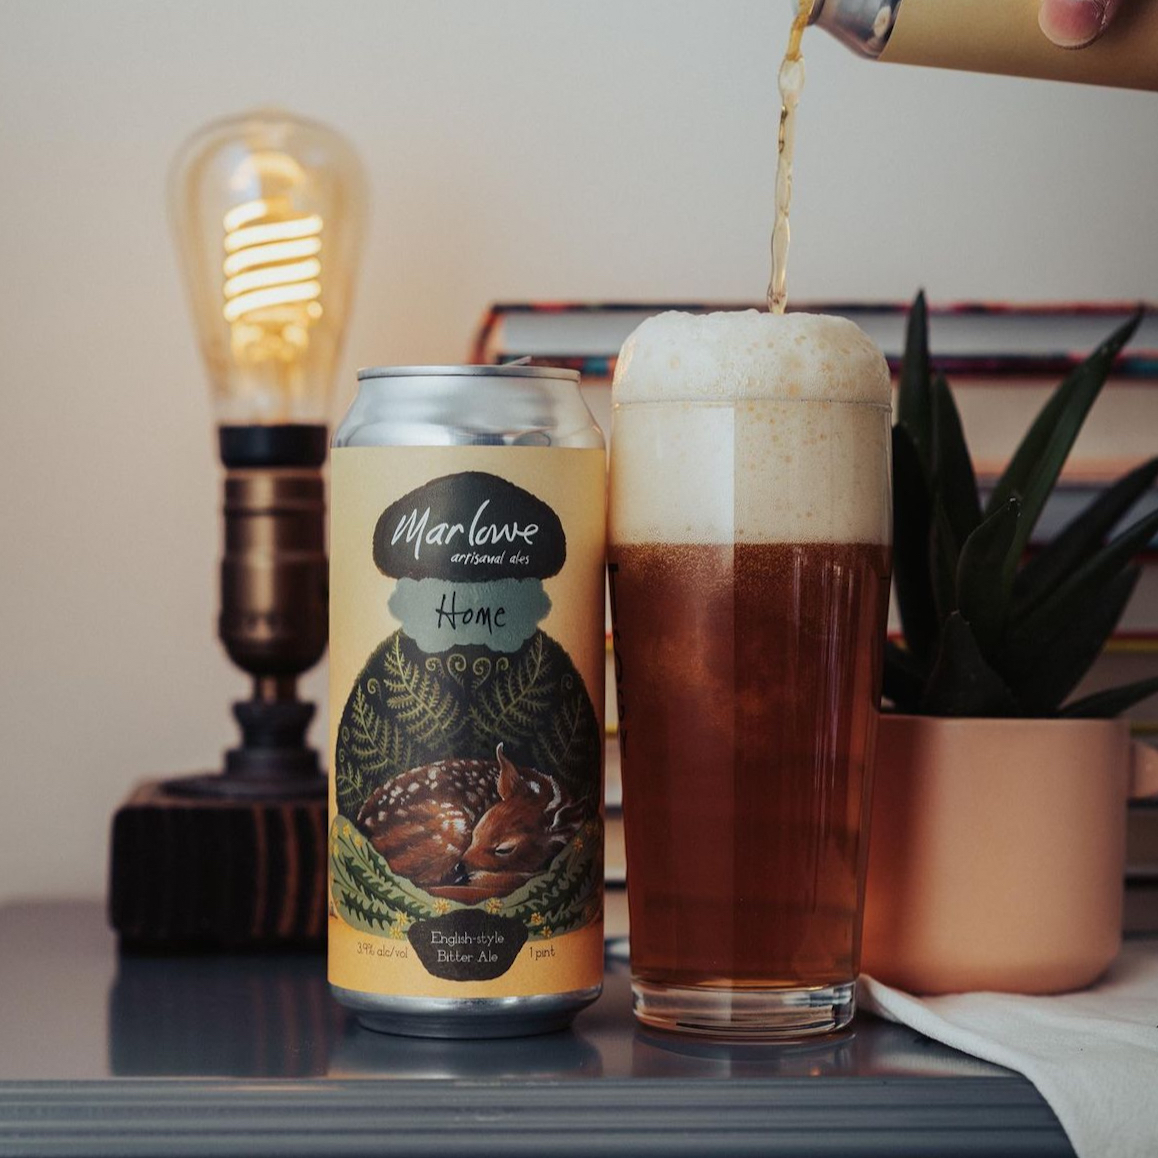 During the Untappd Community Awards, Marlowe Ales secured 3 gold medals with being for “The Broken and the Dead”—an American Brown Ale rated 4.188–the highest-rated beer for that category in the US. P.S. We have Marlowe’s gold medal-winning beer featured in the Top Rated Box!